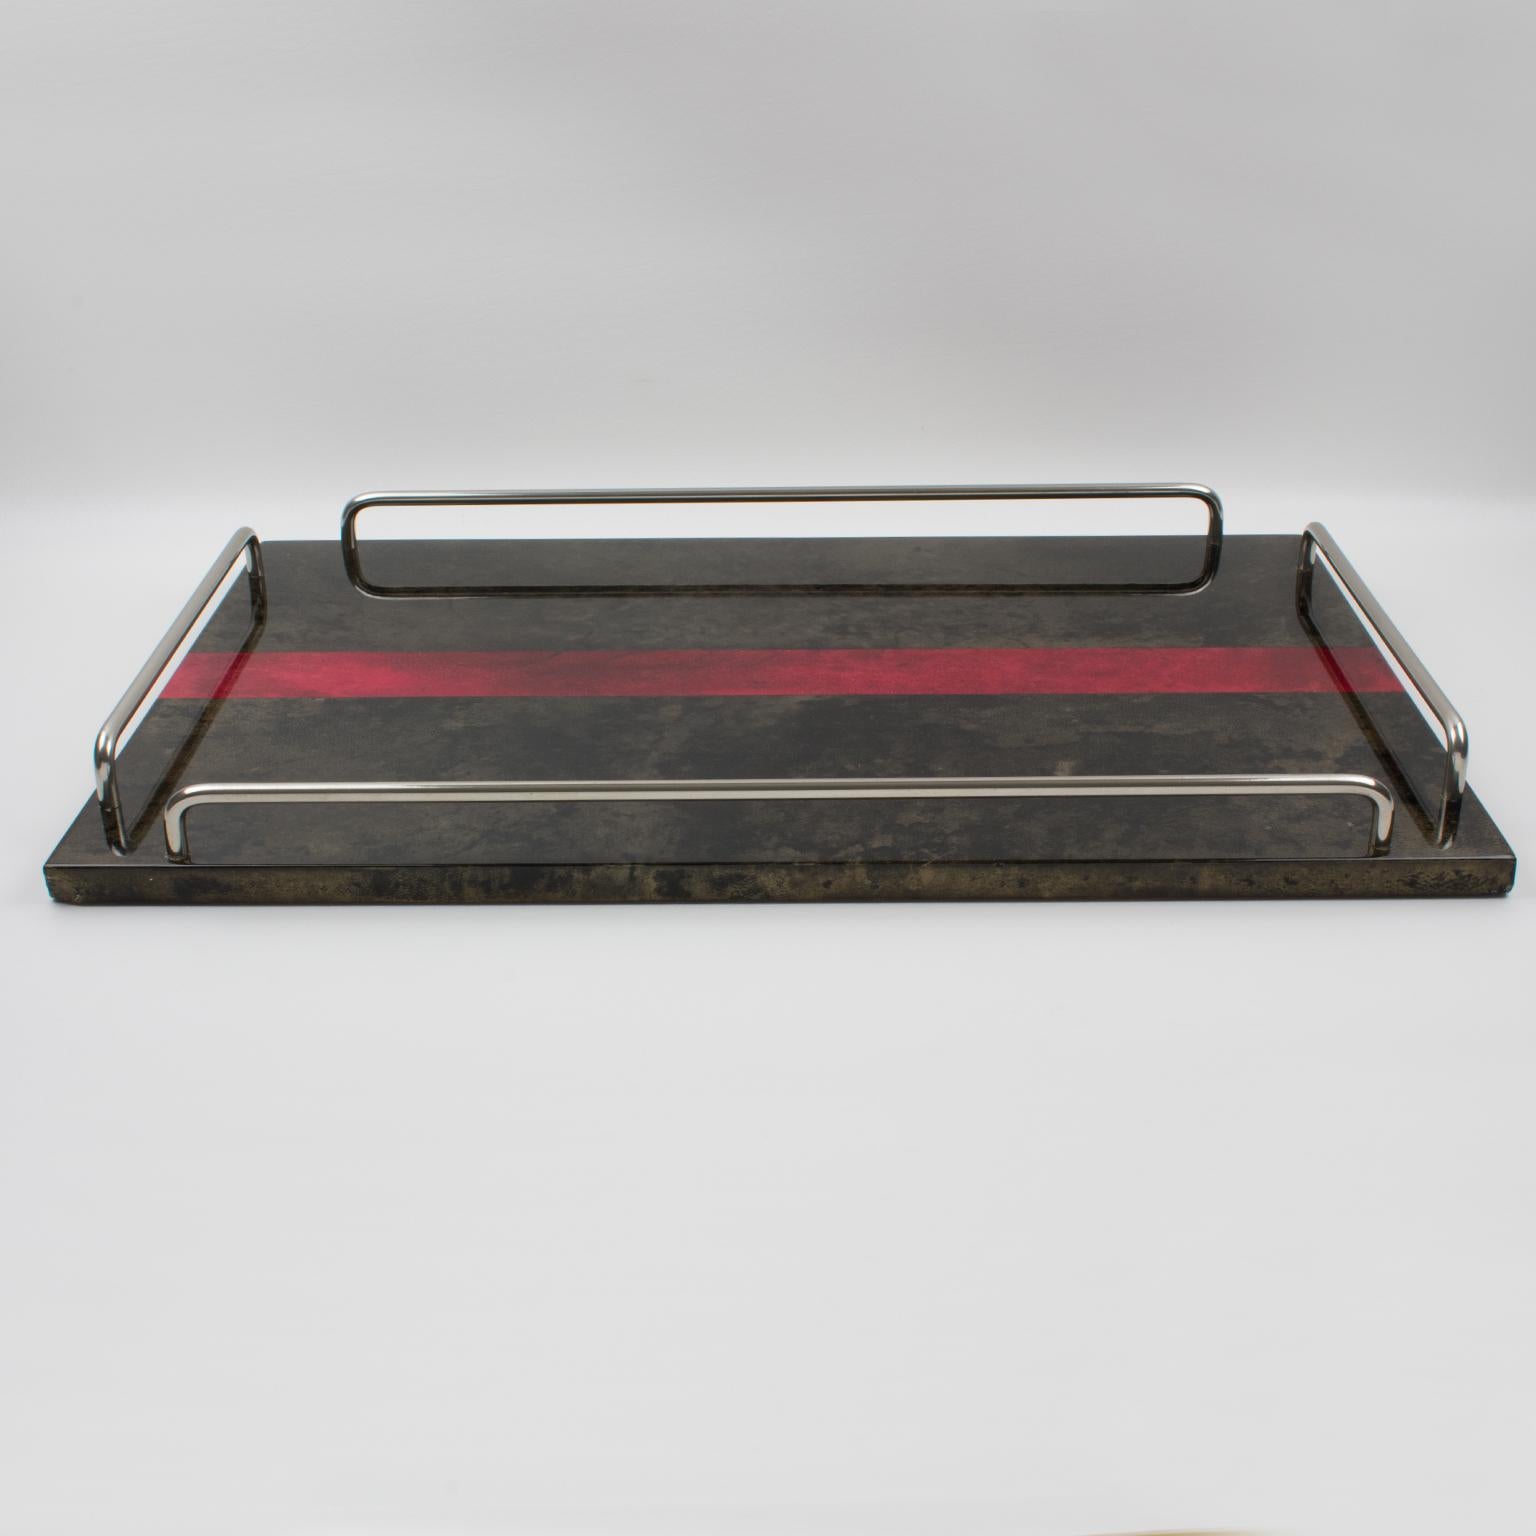 Very stylish lacquered goatskin and chromed metal barware butler tray by Italian designer Aldo Tura from the 1960s. Goatskin vellum covered rectangular serving tray in a rich brilliant brown color contrasted with an oxblood red color strip, with